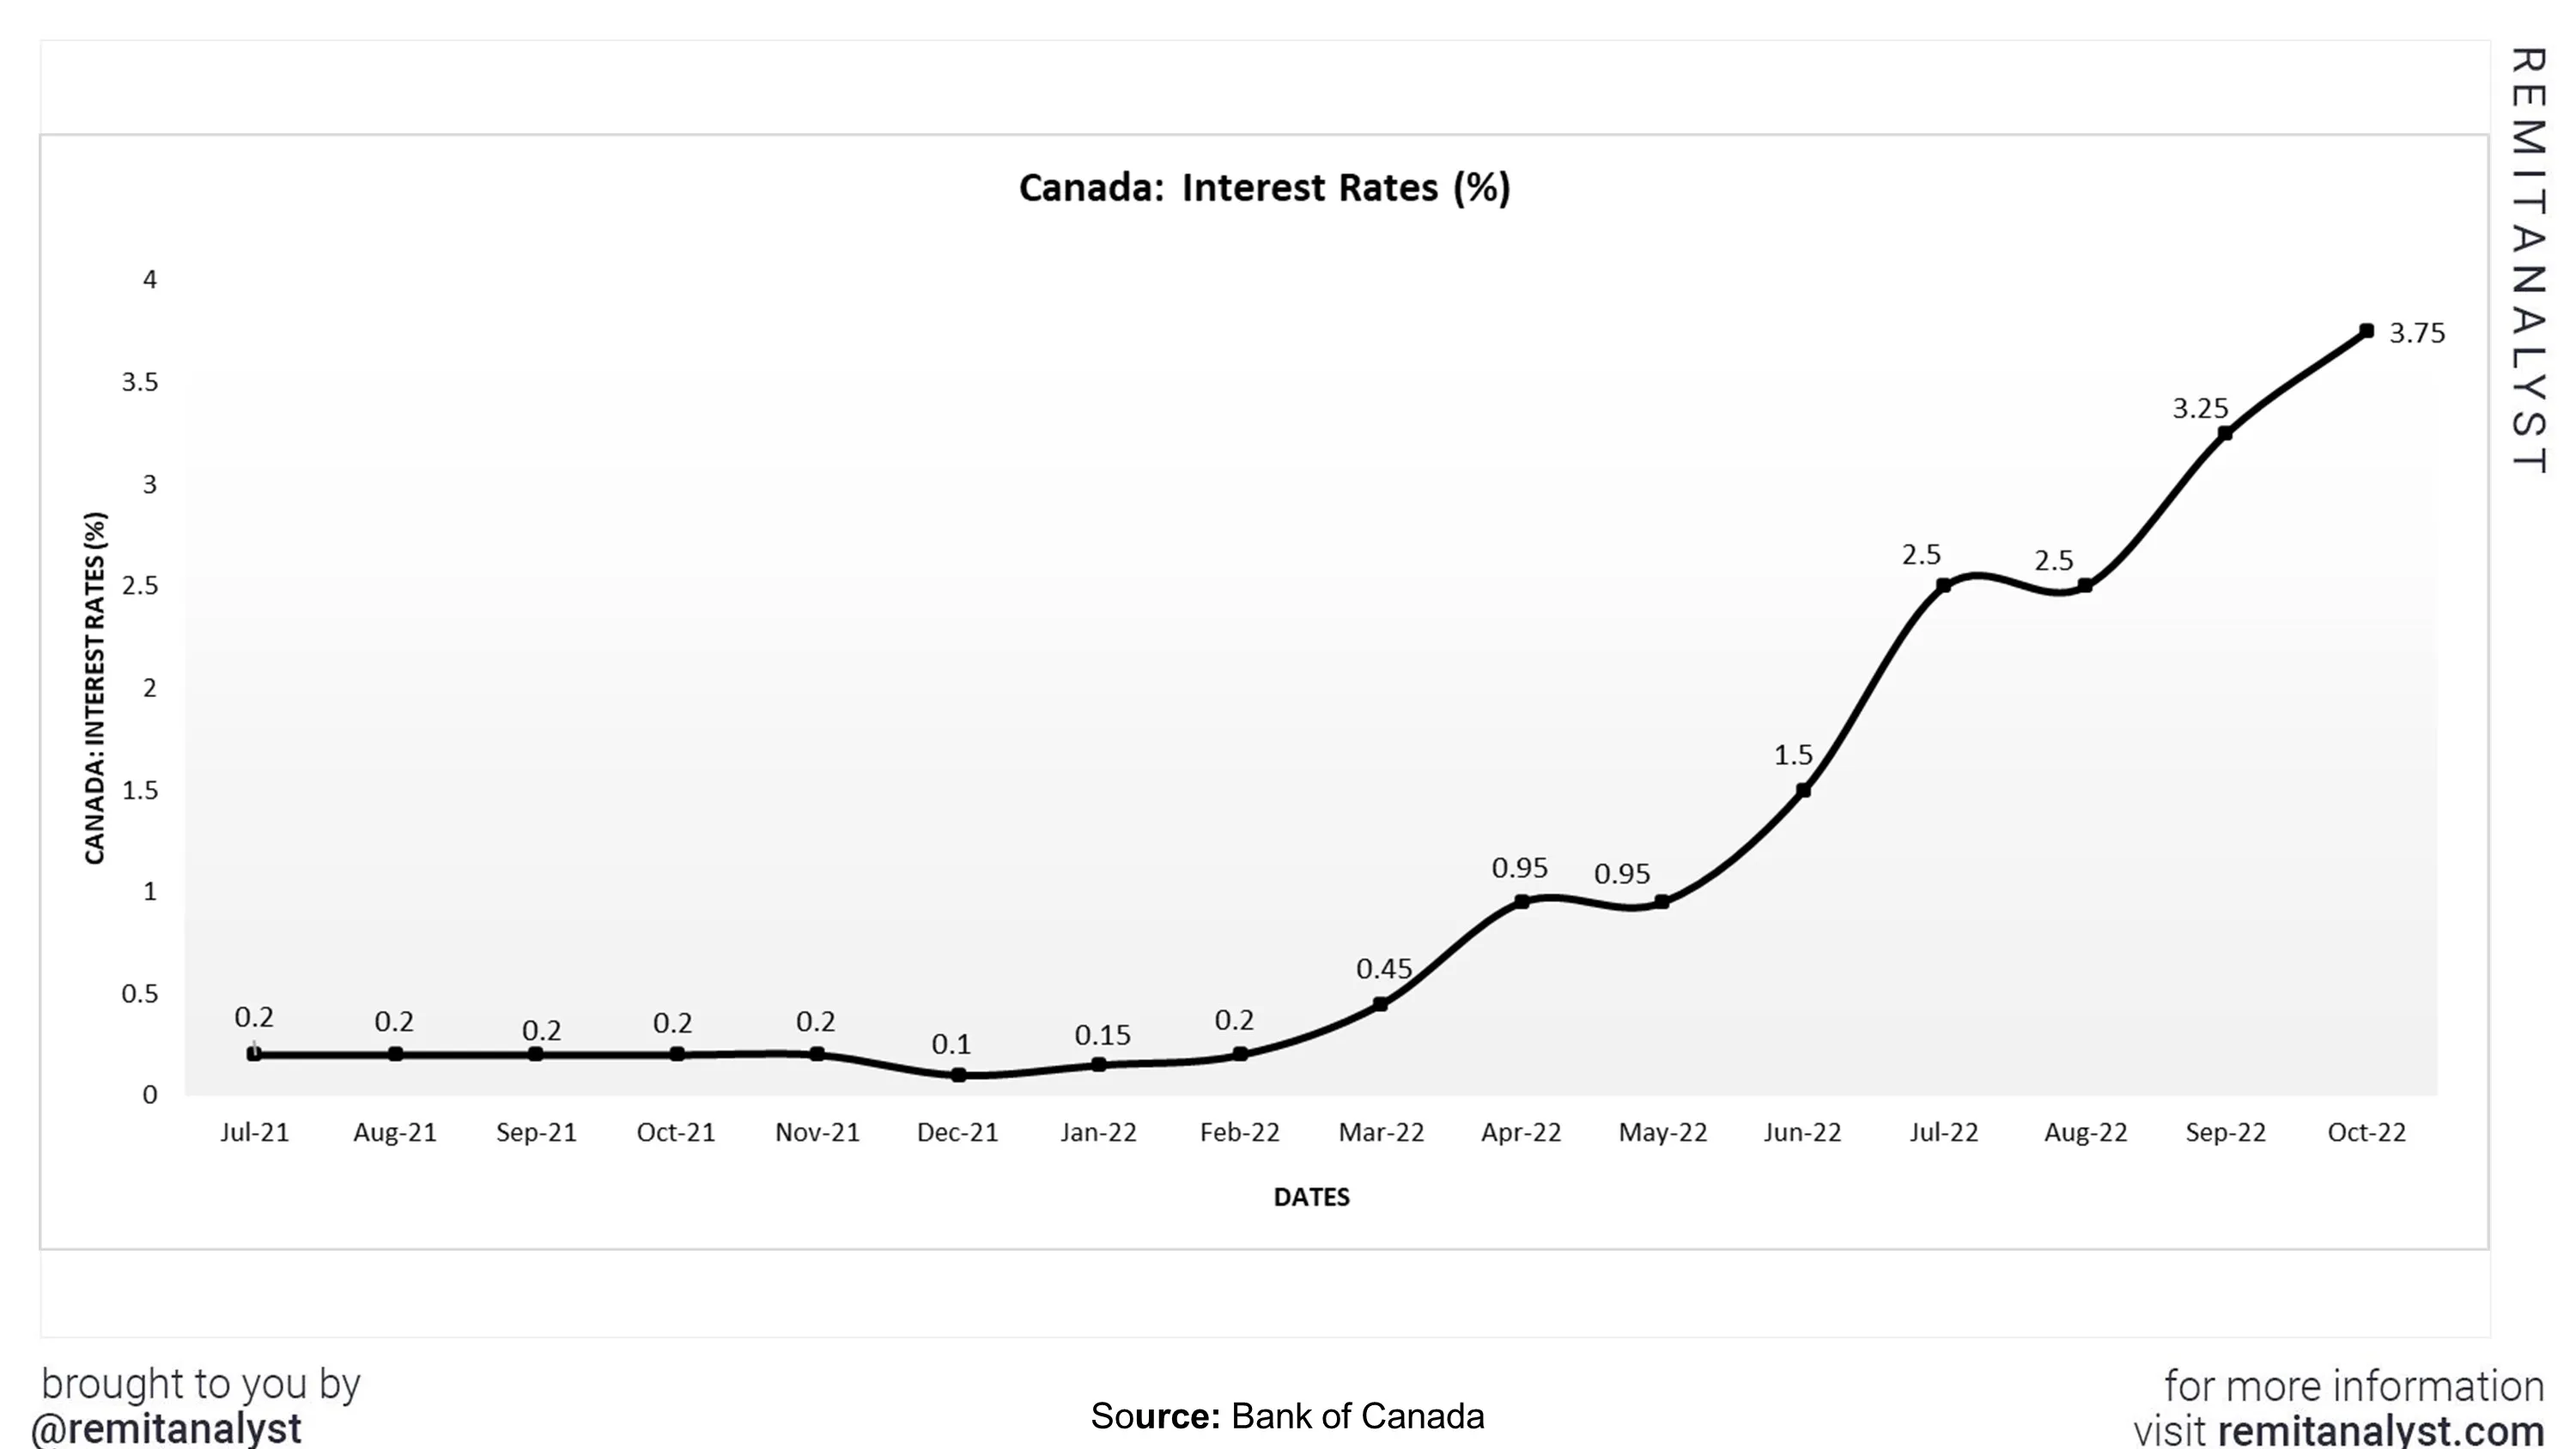 interest-rates-canada-from-jul-2021-to-oct-2022